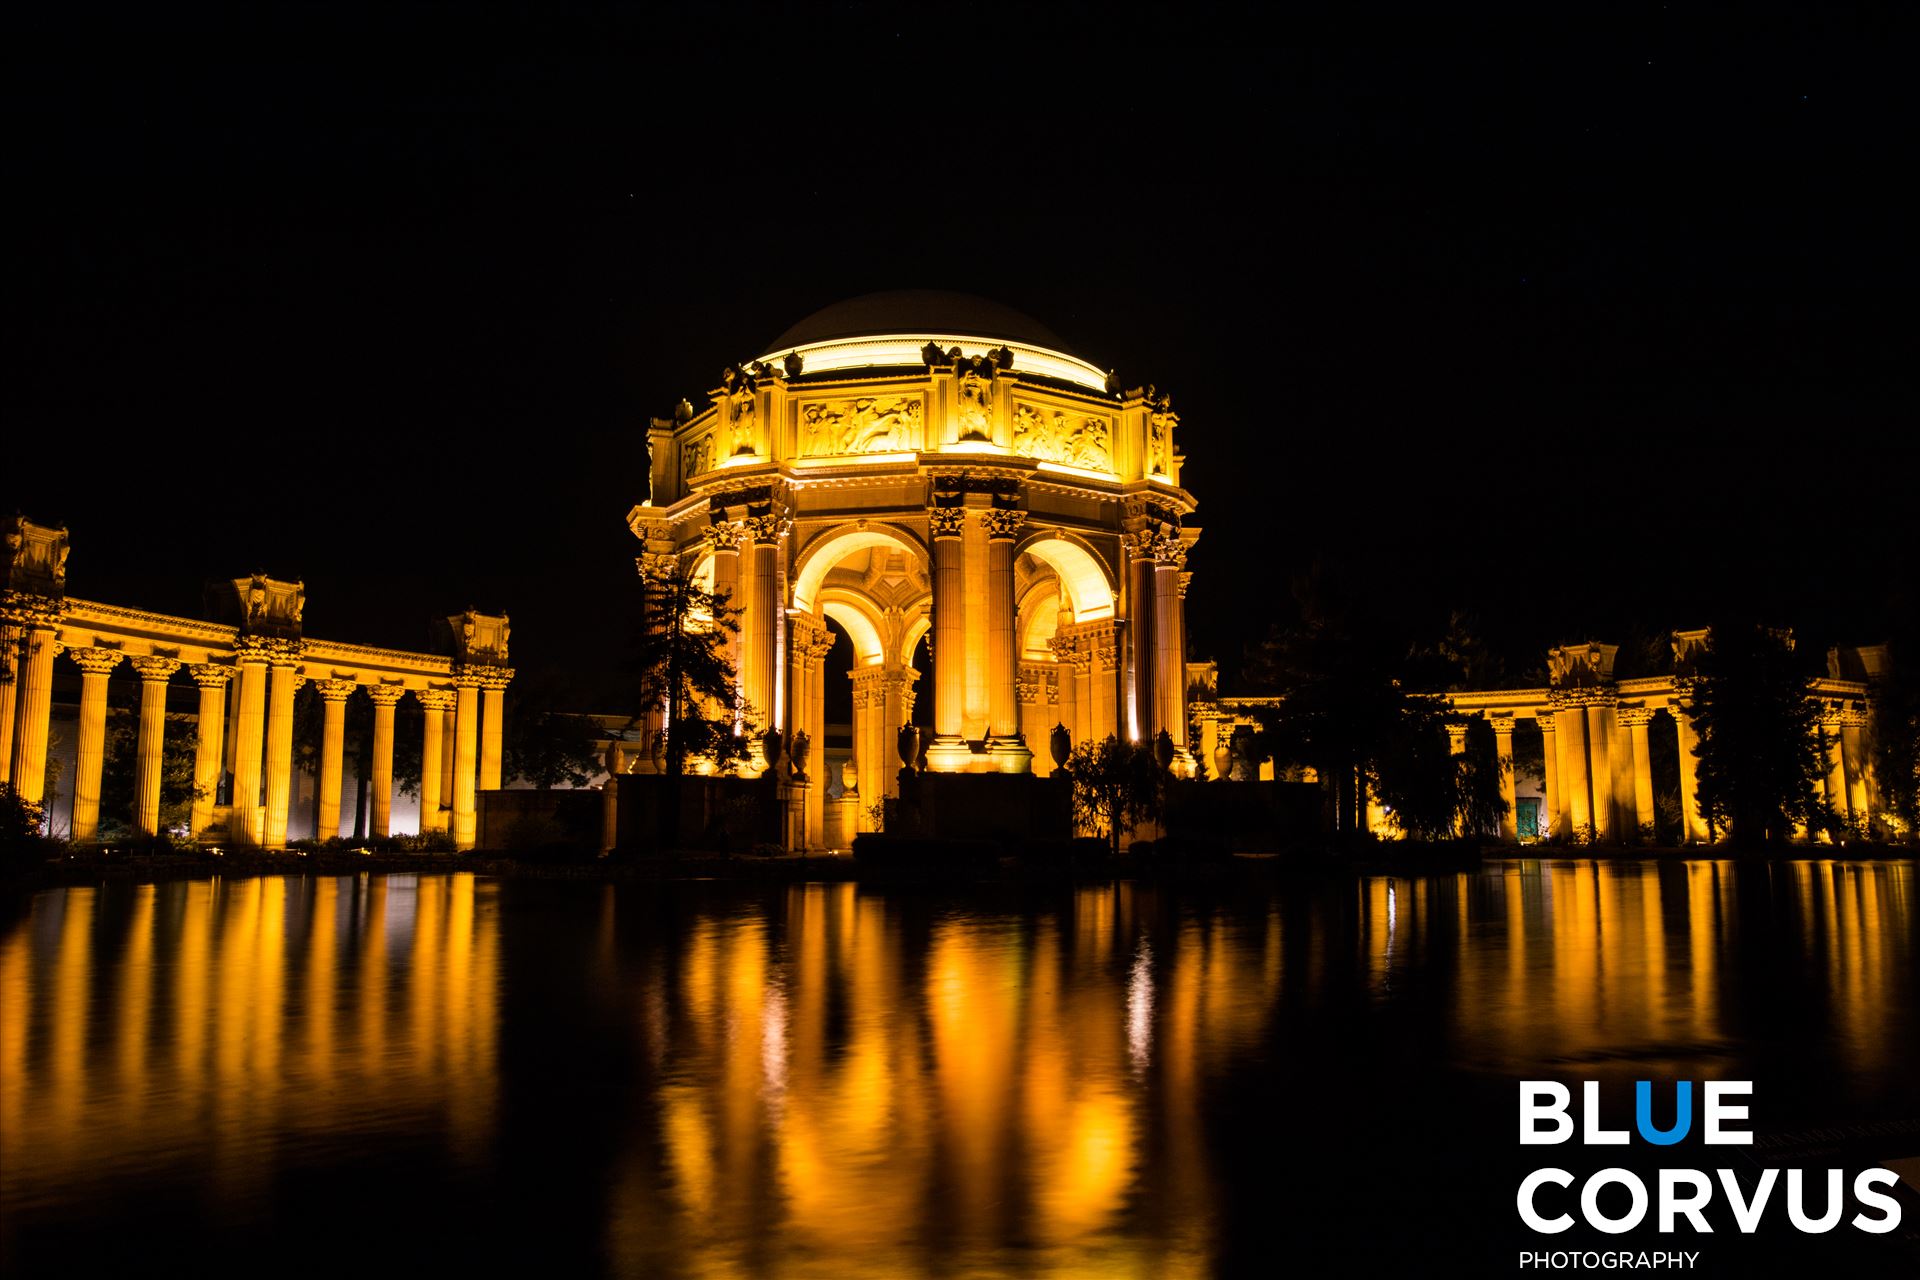 "Golden Reflection" Location: The Palace of Fine Arts in San Francisco, California by Eddie Zamora